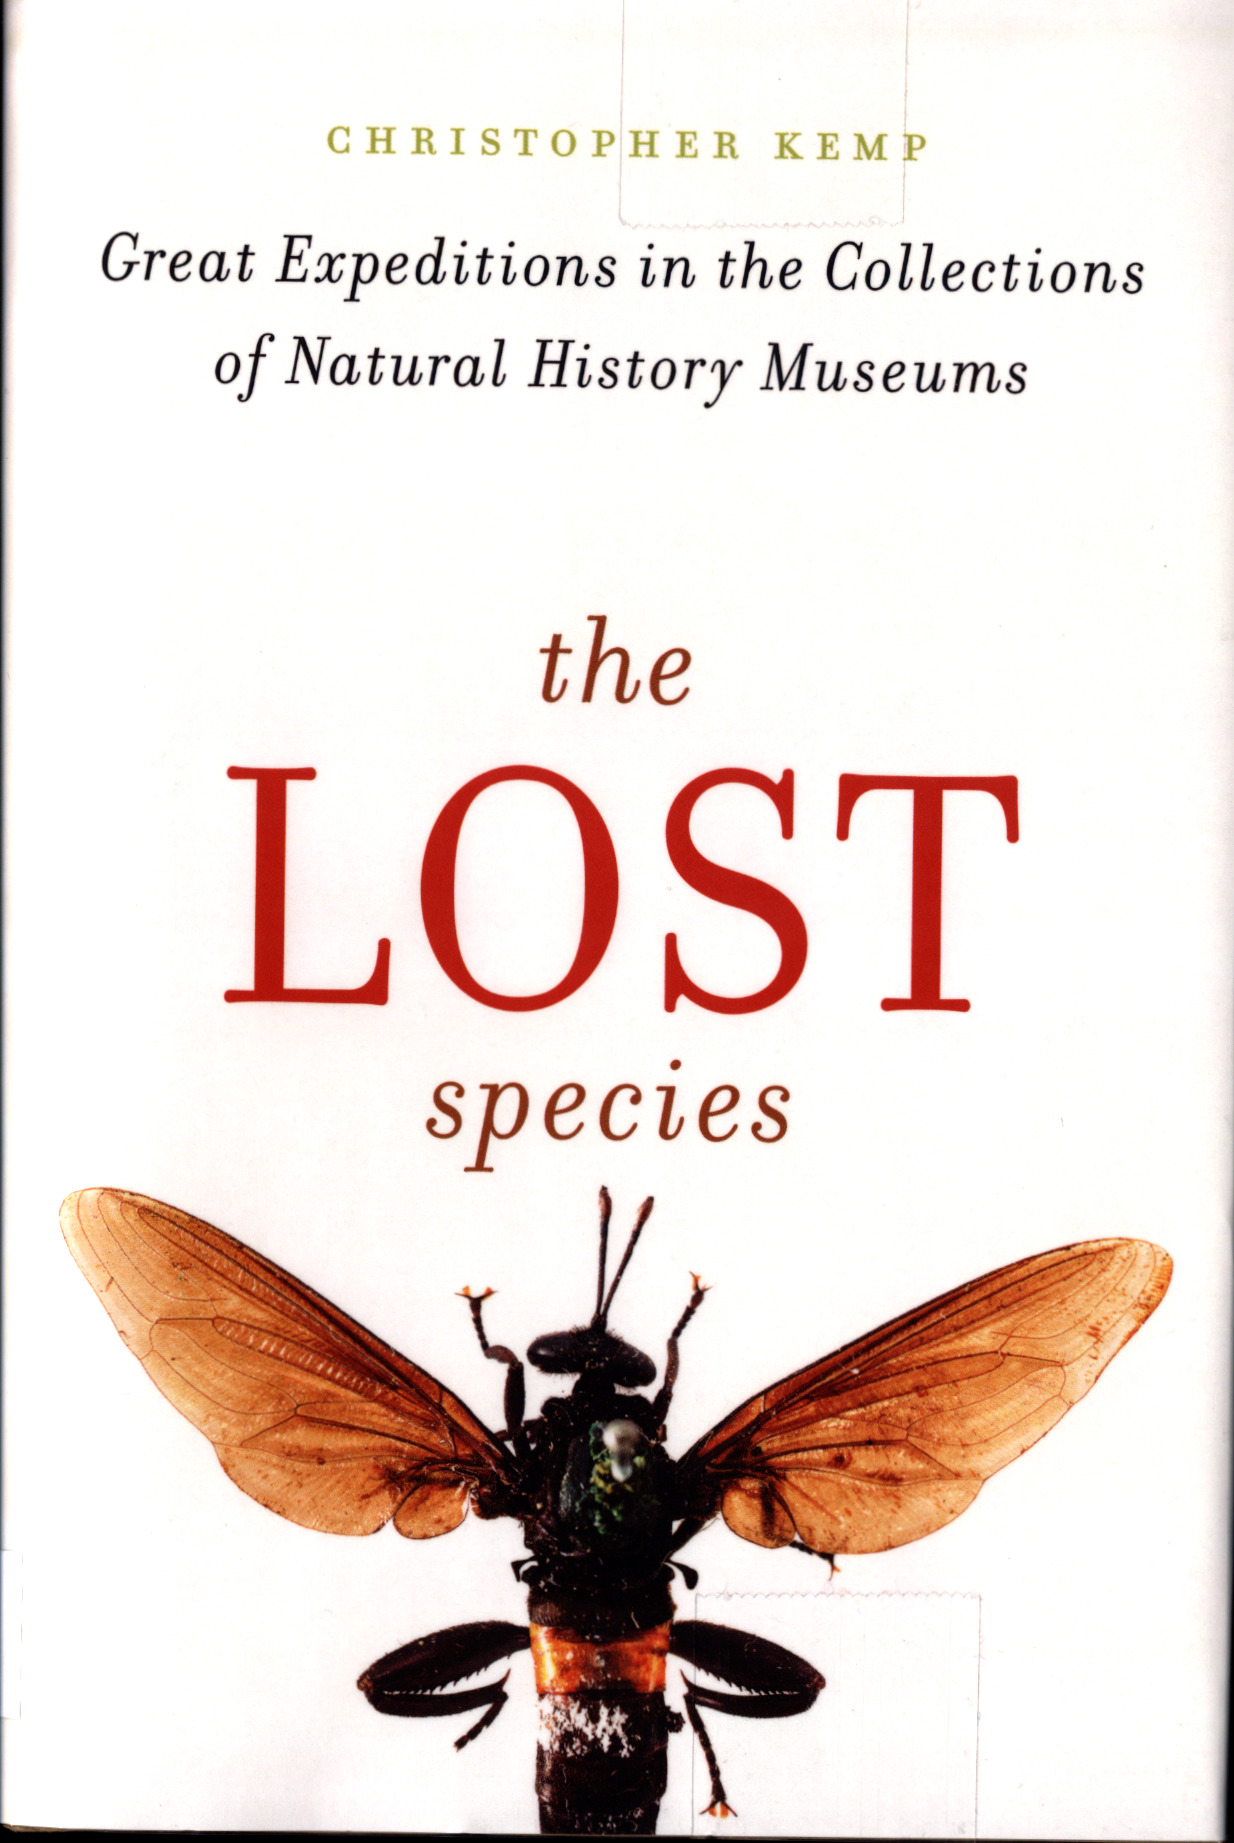 The Lost Species: Great Expeditions in the Collections of Natural History Museums book cover